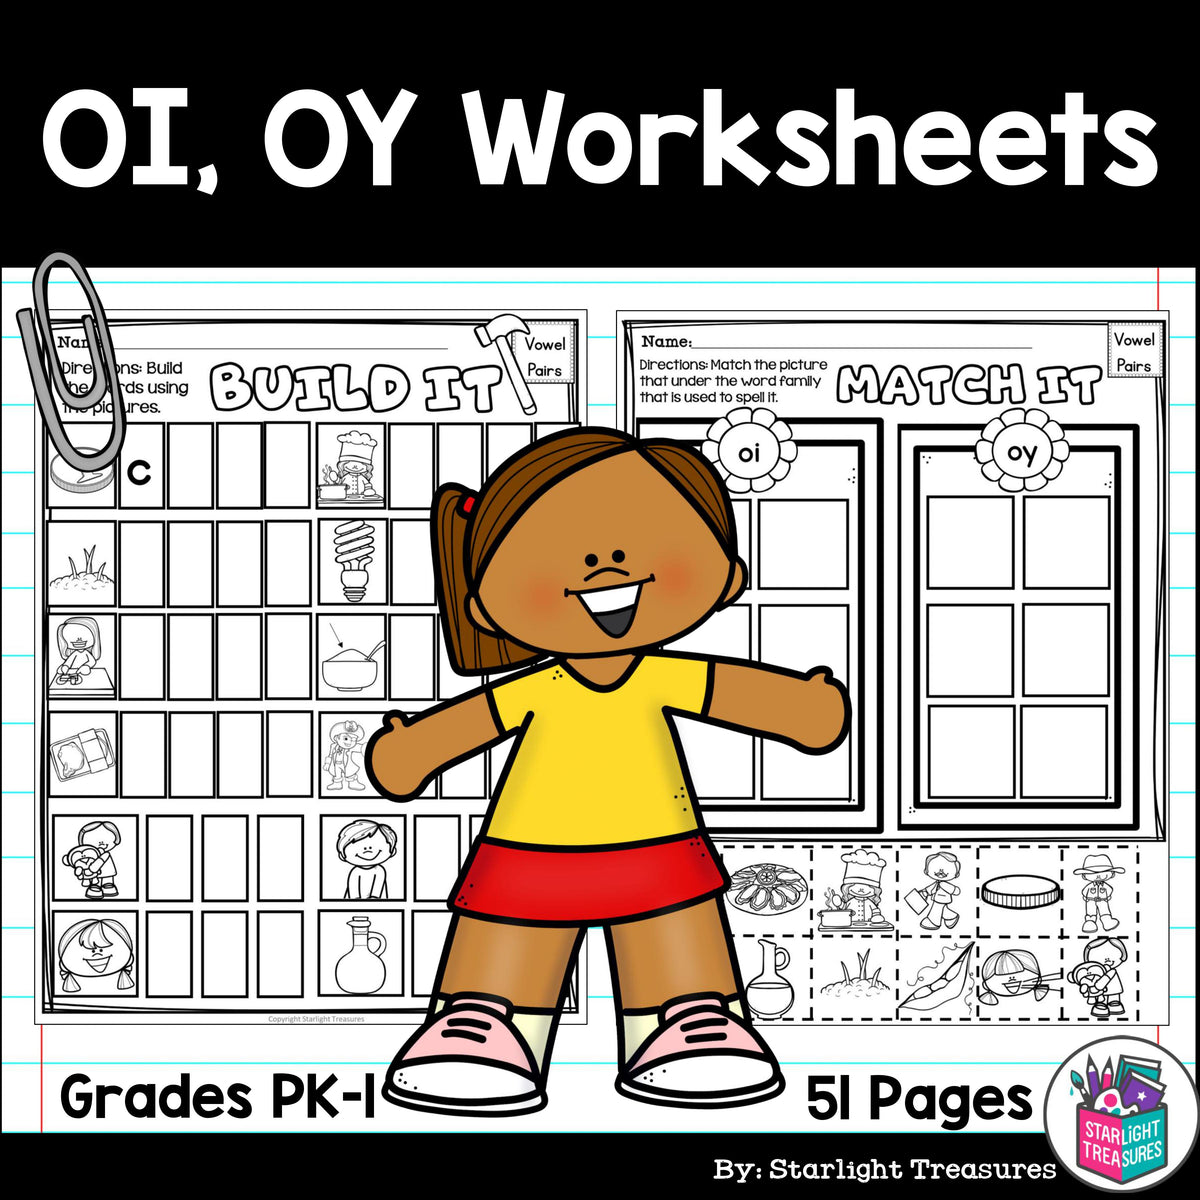 Vowel Pairs OI, OY Worksheets and Activities for Early Readers - Phoni